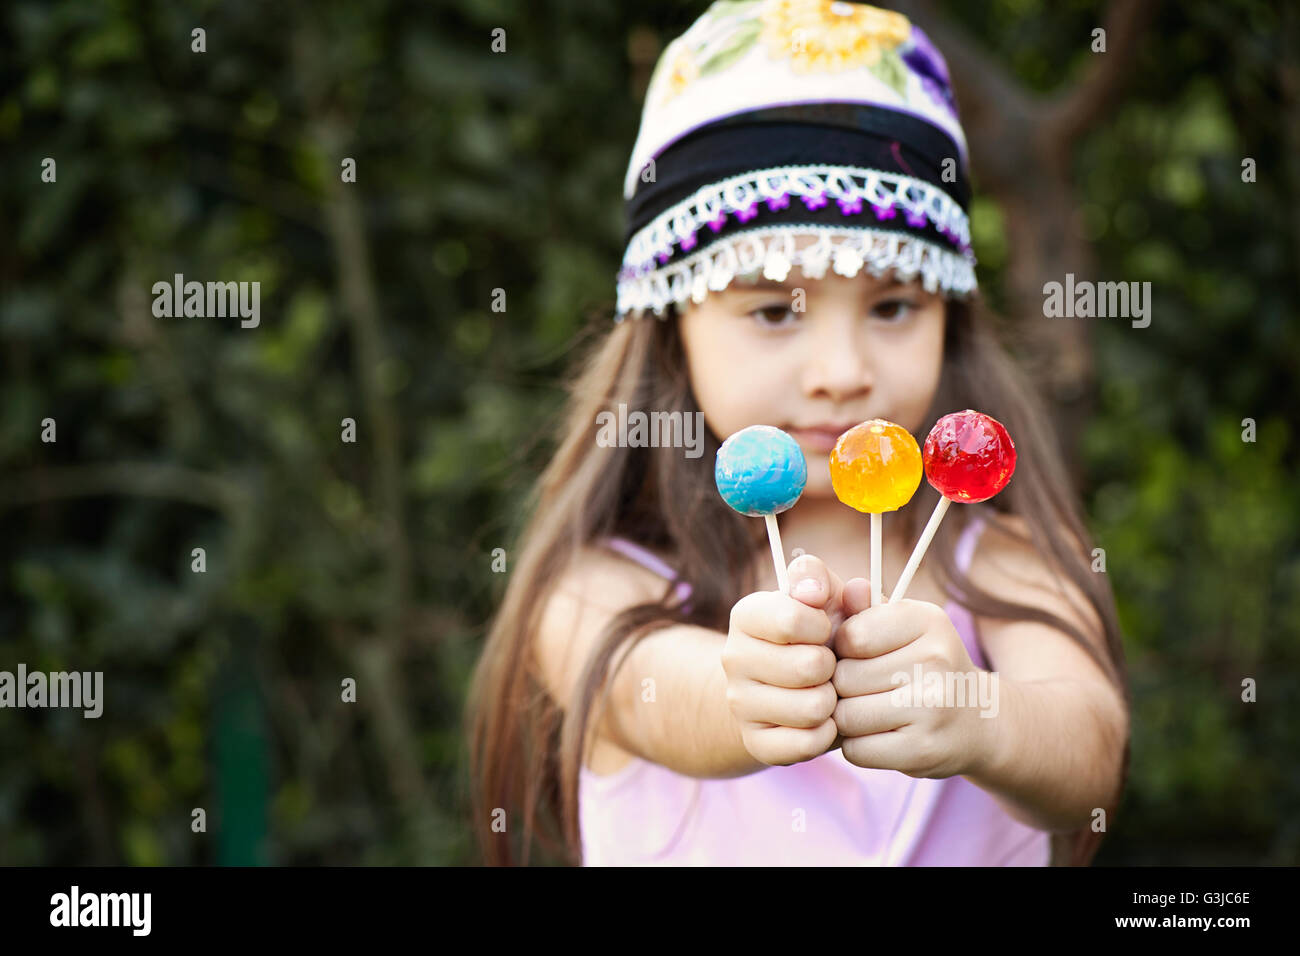 Small girl with  lollipops in each hand Stock Photo